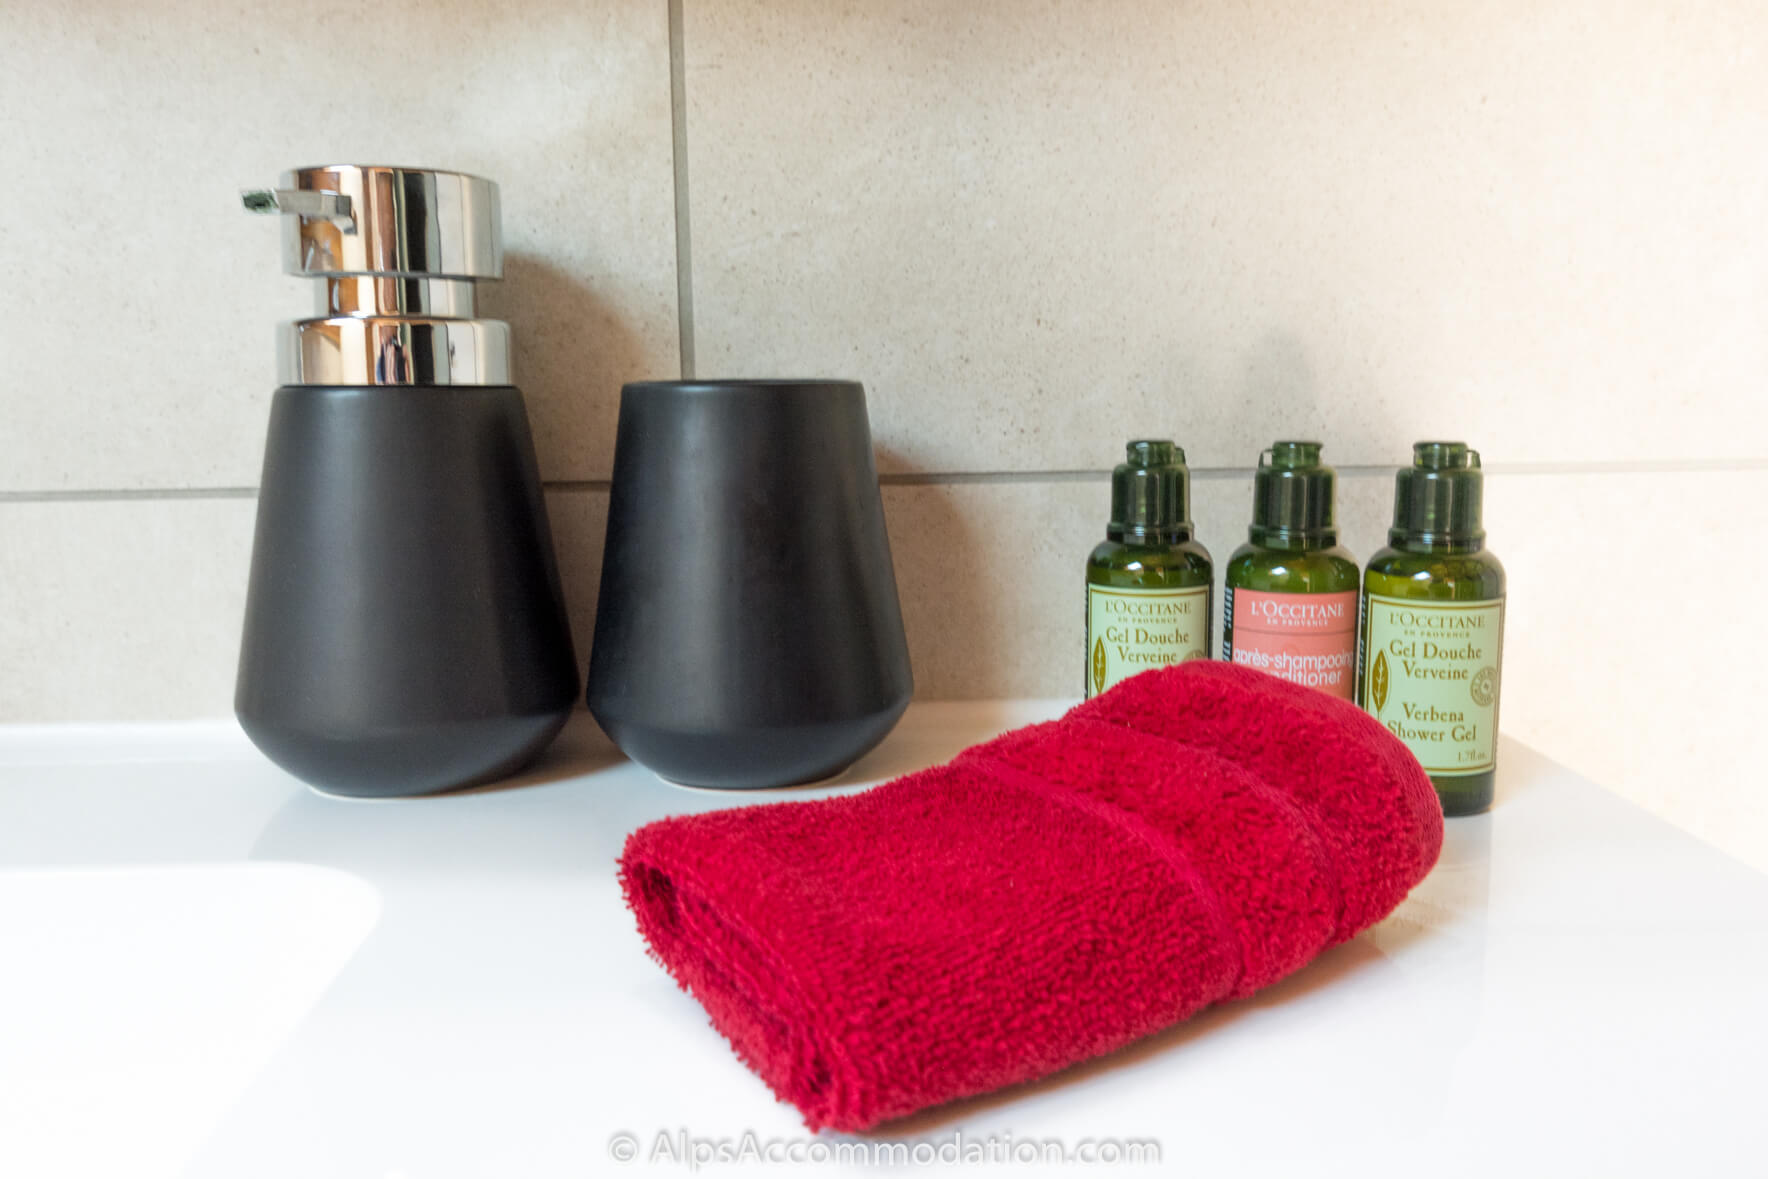 Chalet Sole Mio Morillon - Luxurious toiletries are provided